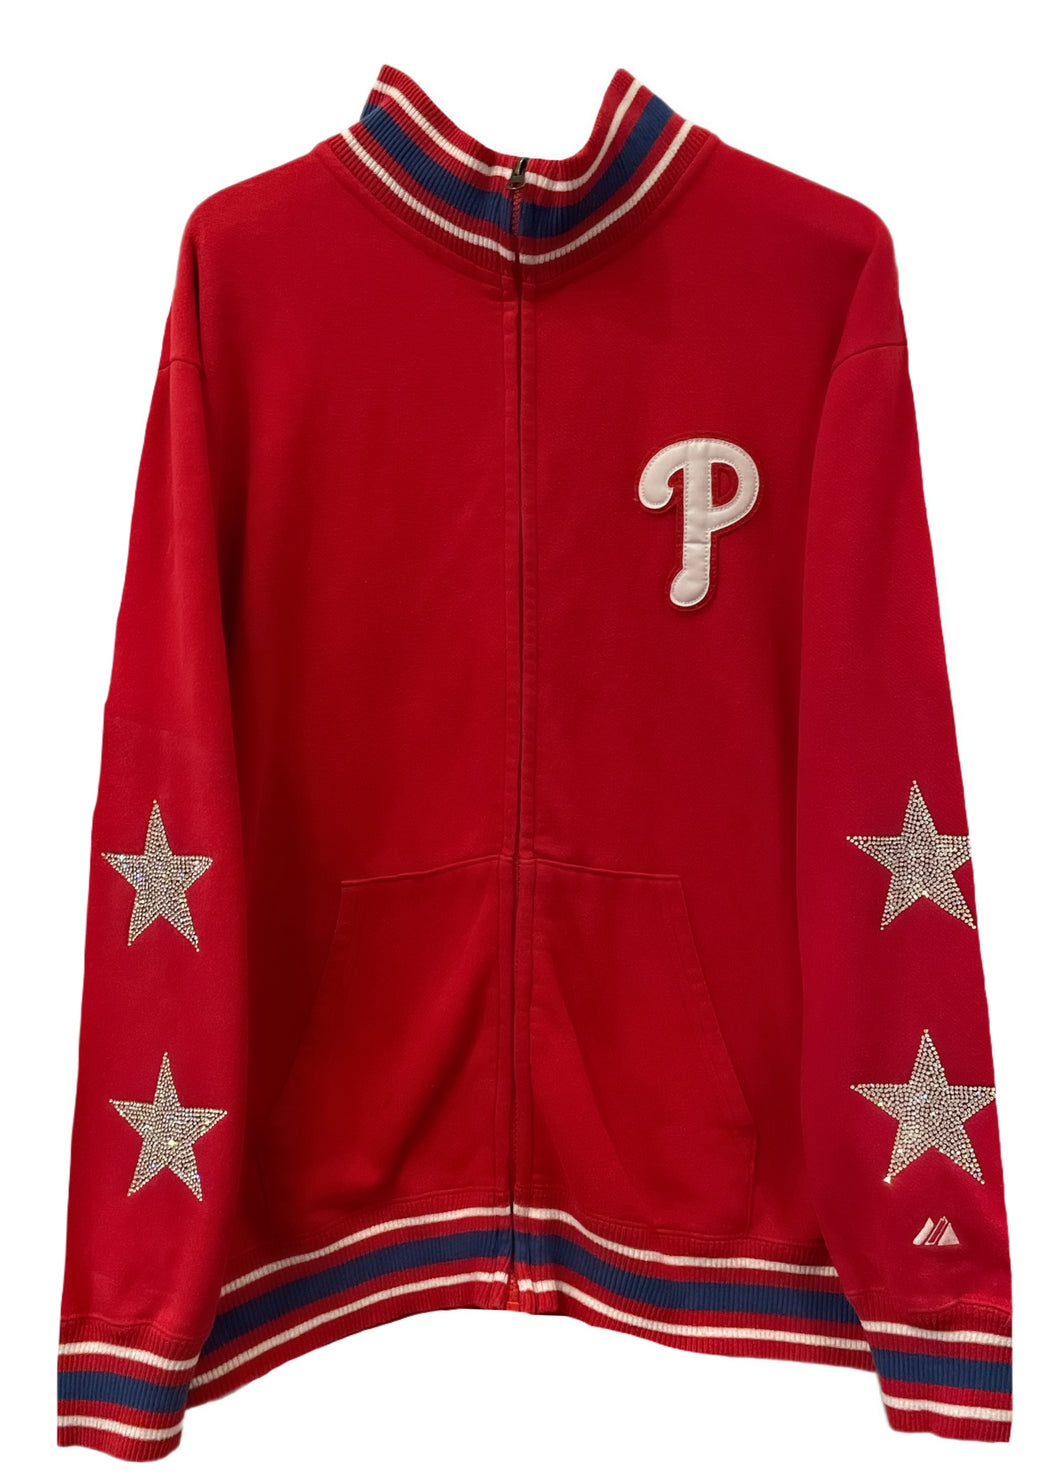 Philadelphia Phillies, MLB One of a KIND Vintage Zip Up with Crystal Star Design